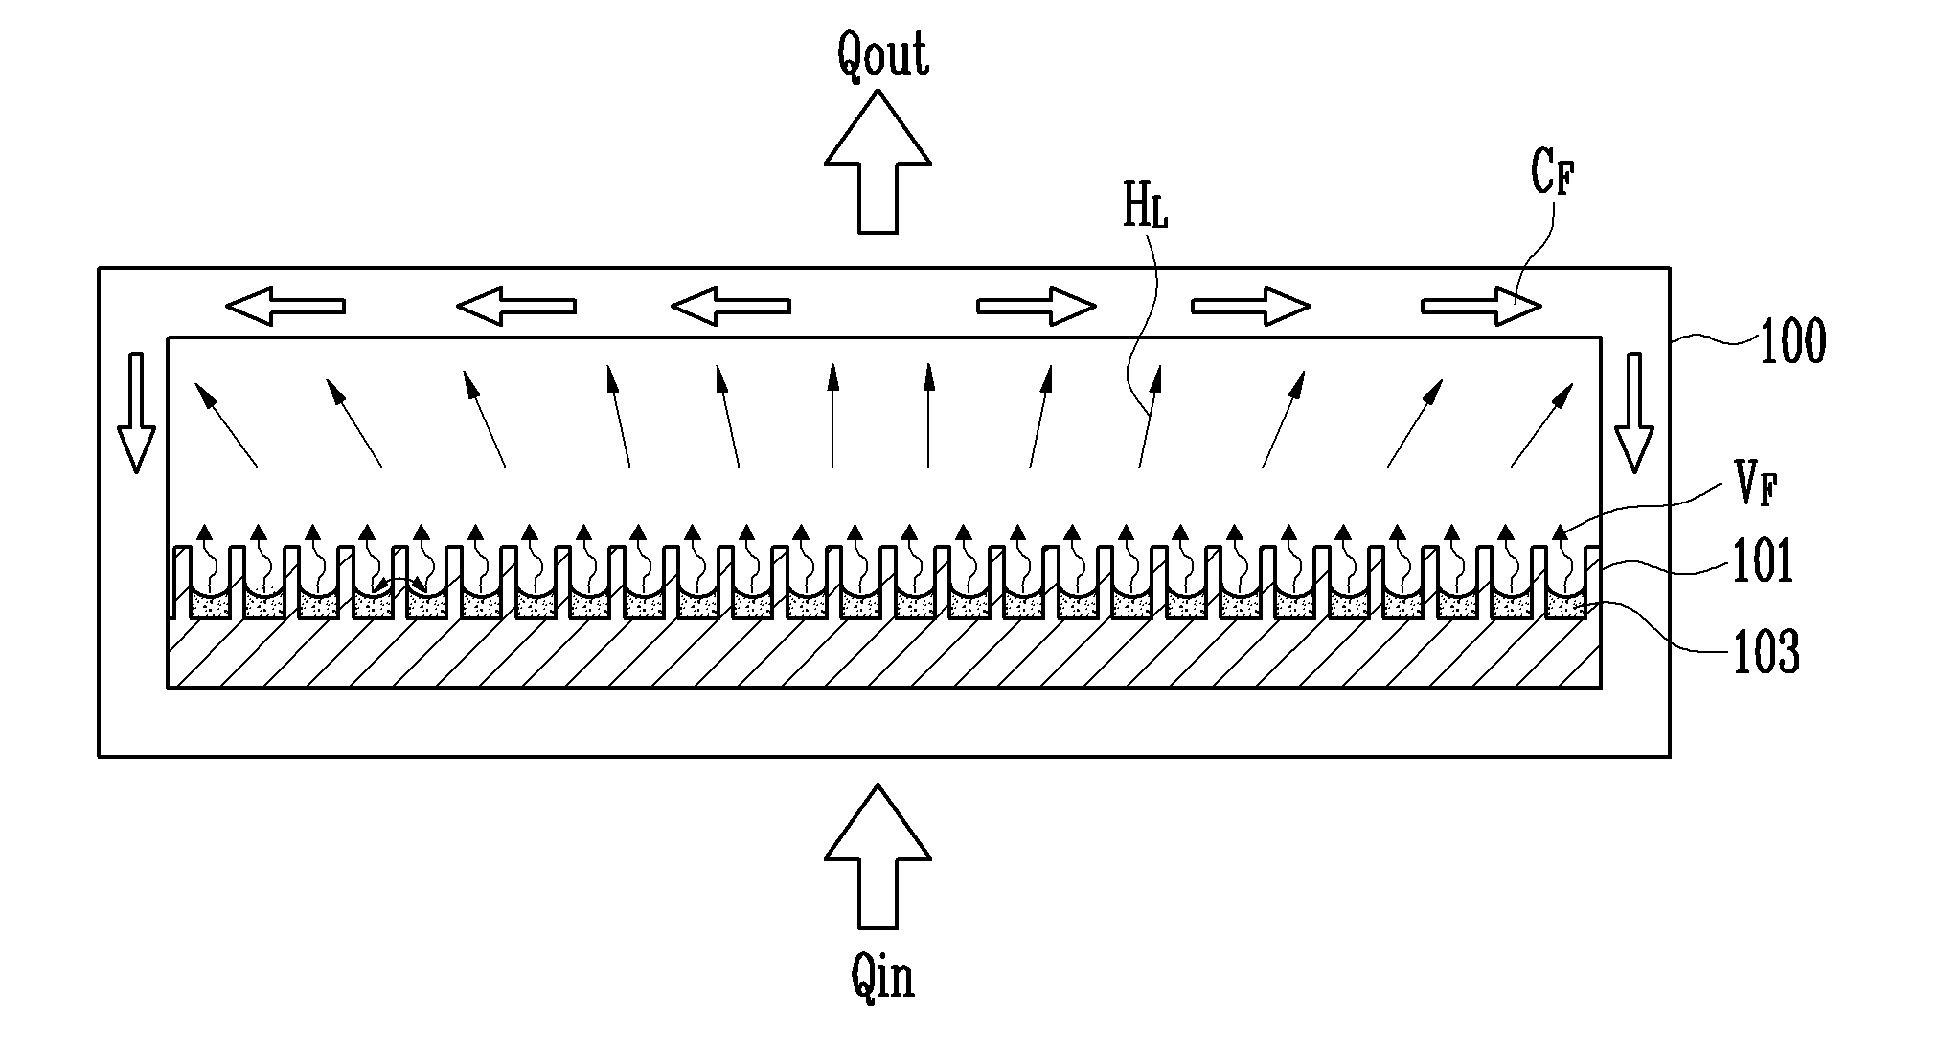 Heat transfer device with functions of power generation